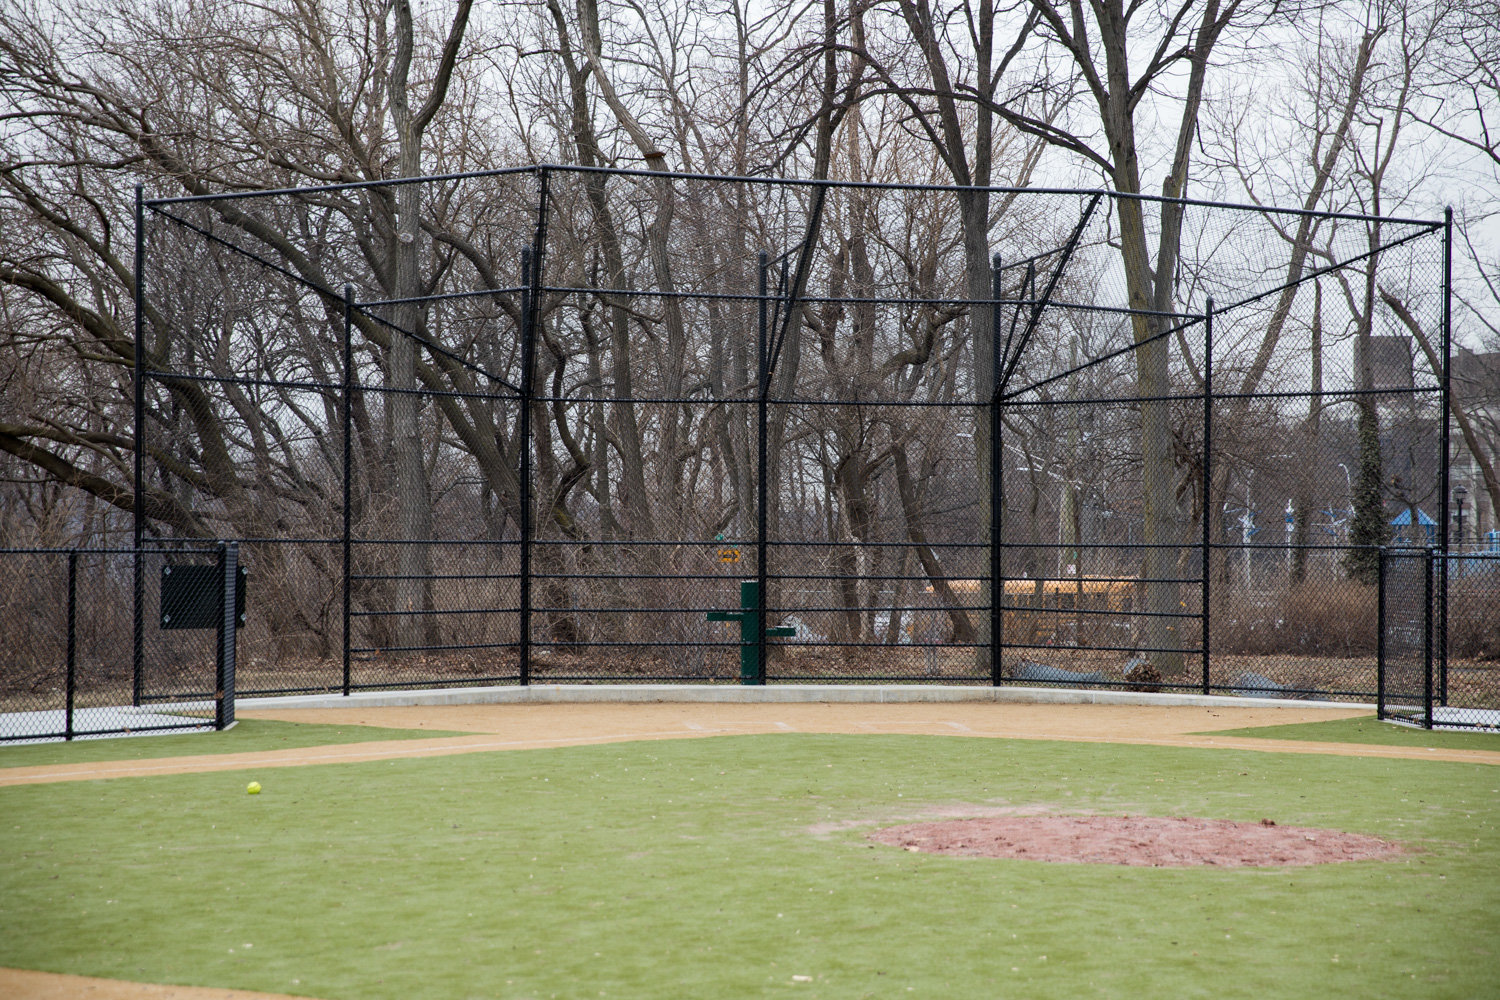 The newly renovated ballfields at Seton Park await opening day. Councilman Andrew Cohen and the state provided more than $1.9 million last year toward the renovation of the park’s ballfields.